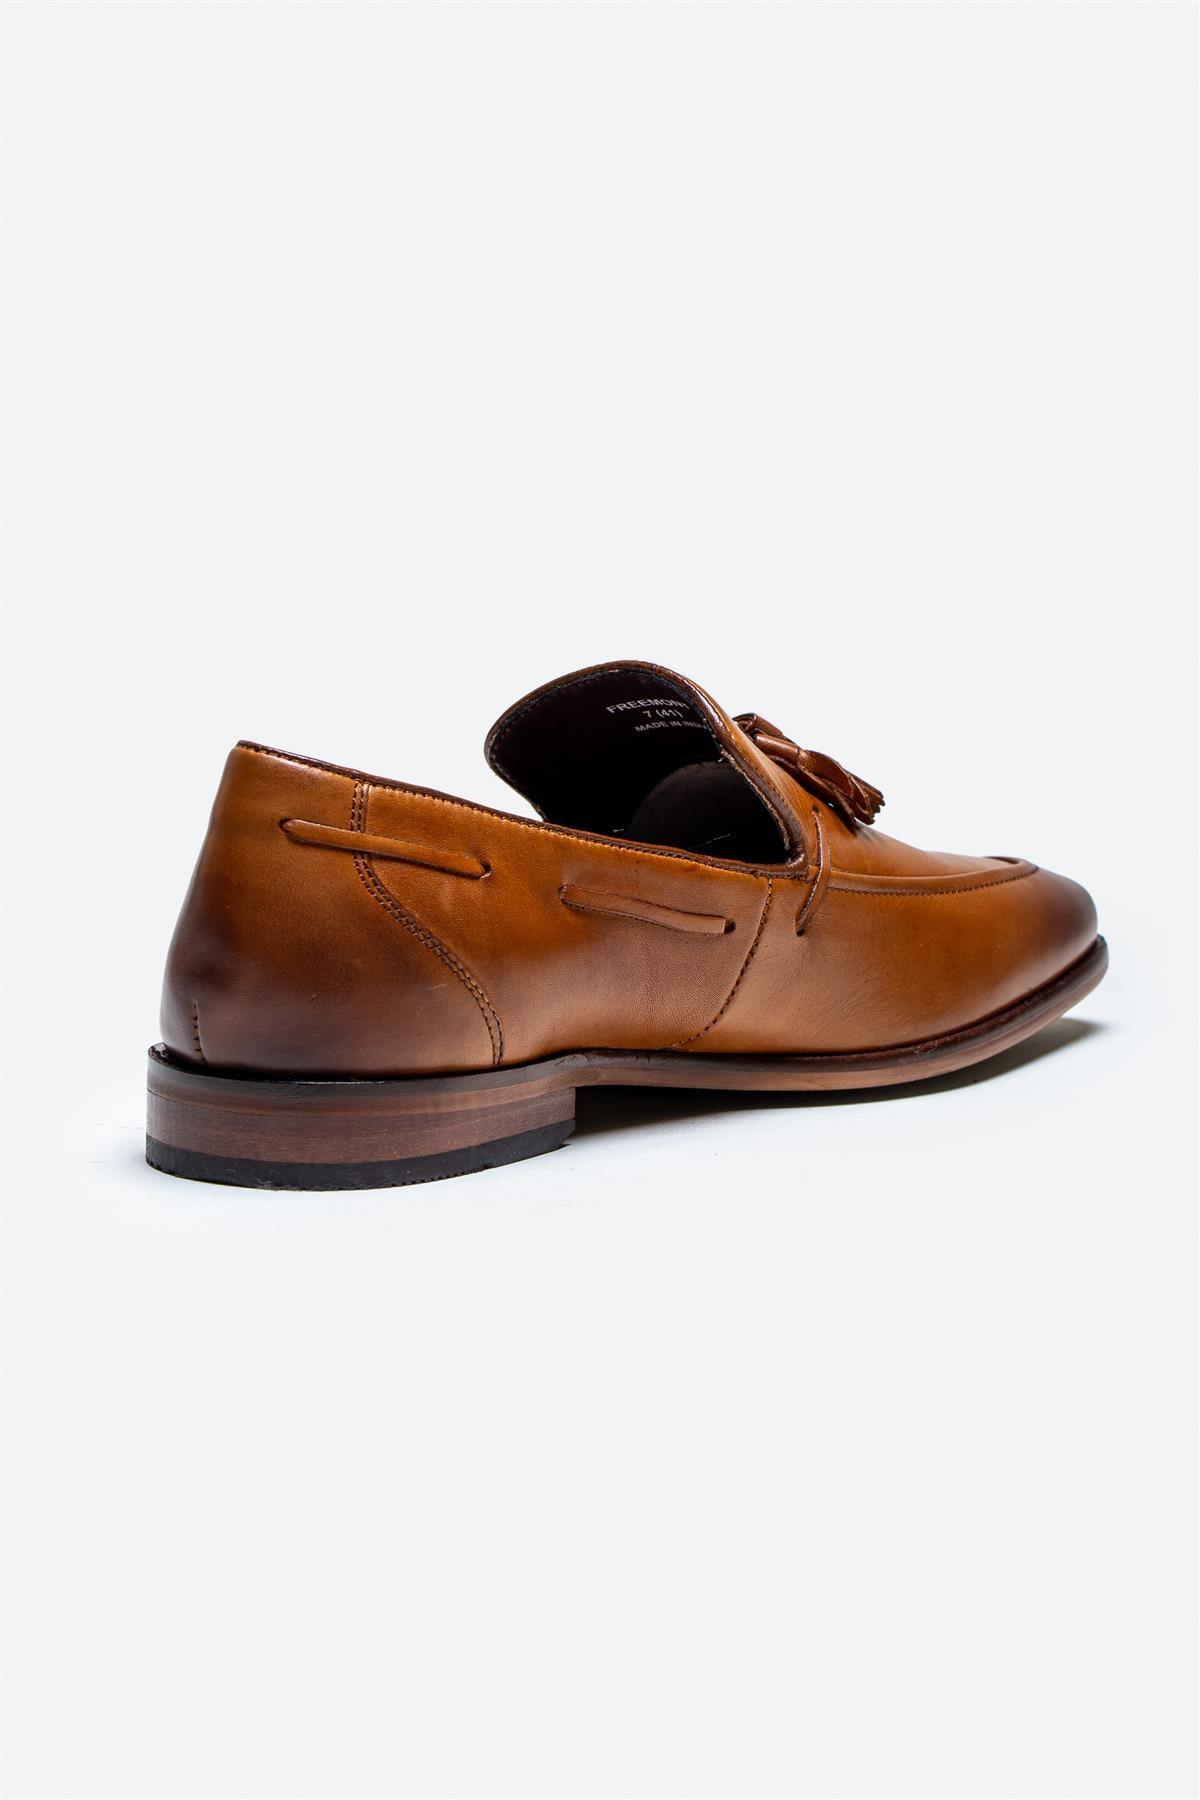 Freemont tan loafers back